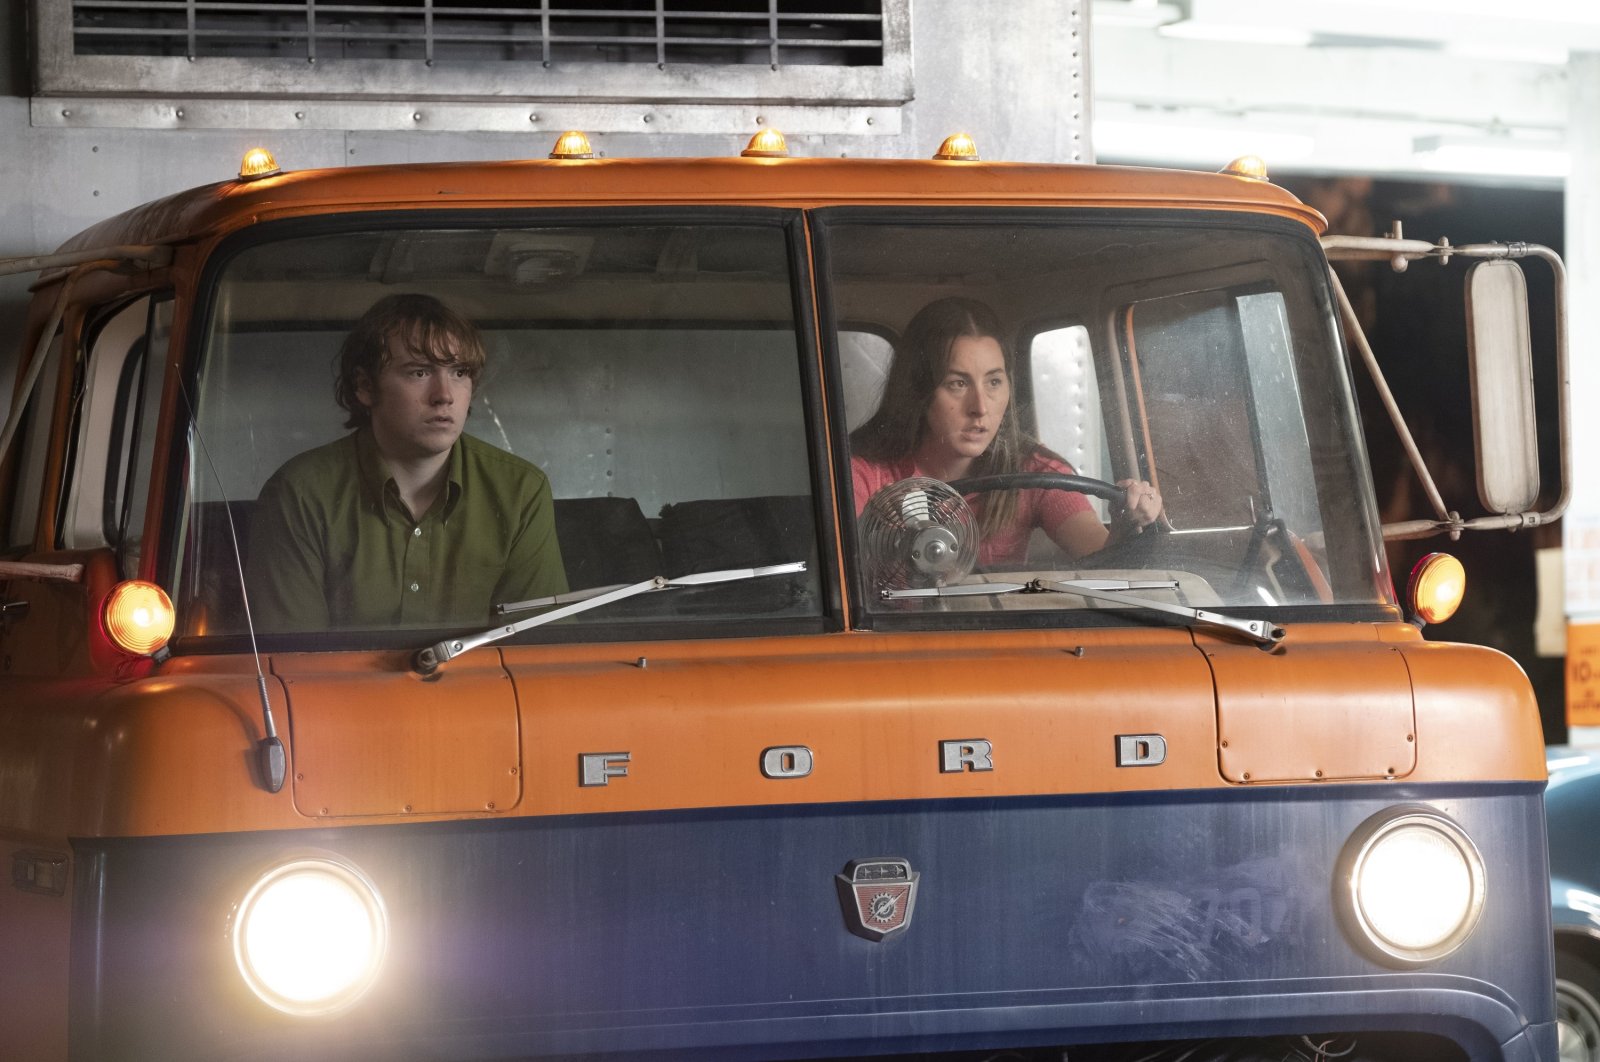 This image released by MGM shows Cooper Hoffman (L) and Alana Haim in a scene from the film "Licorice Pizza." (AP Photo)